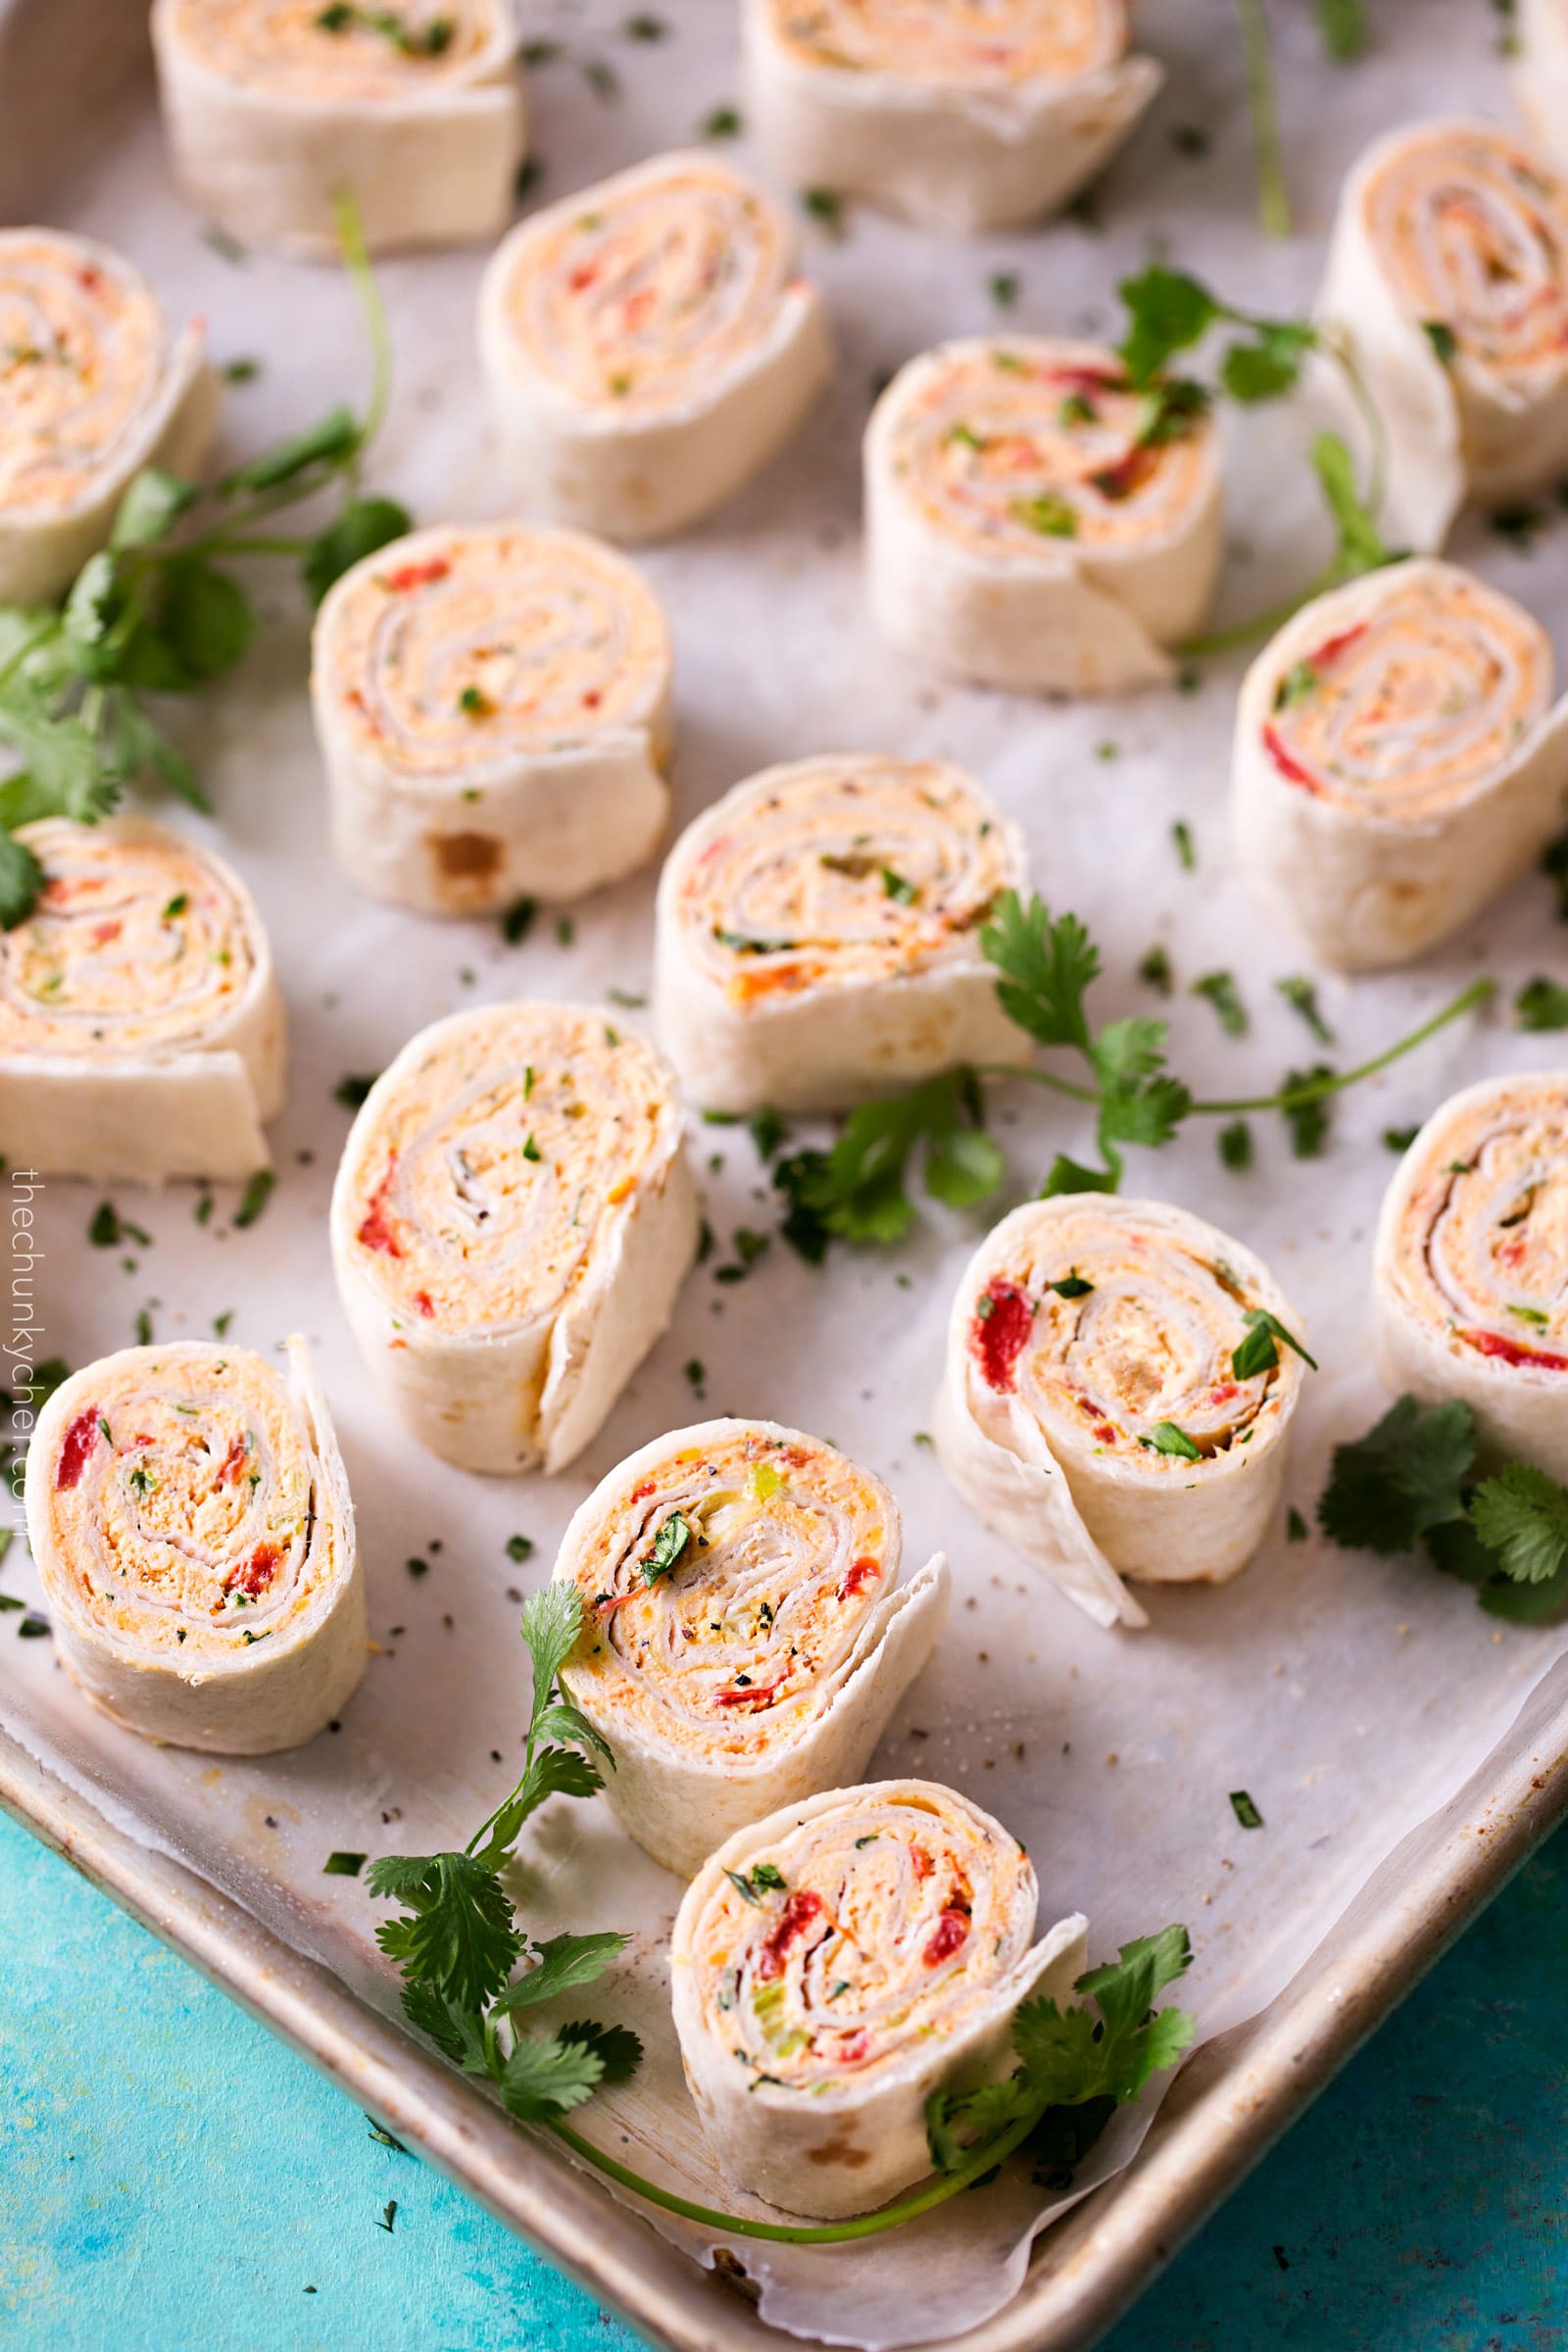 Chicken Taco Mexican Pinwheels | These pinwheels are filled with a creamy chicken taco filling, which is easily customizable, and rolled up to make a perfect appetizer or party food! | http://thechunkychef.com